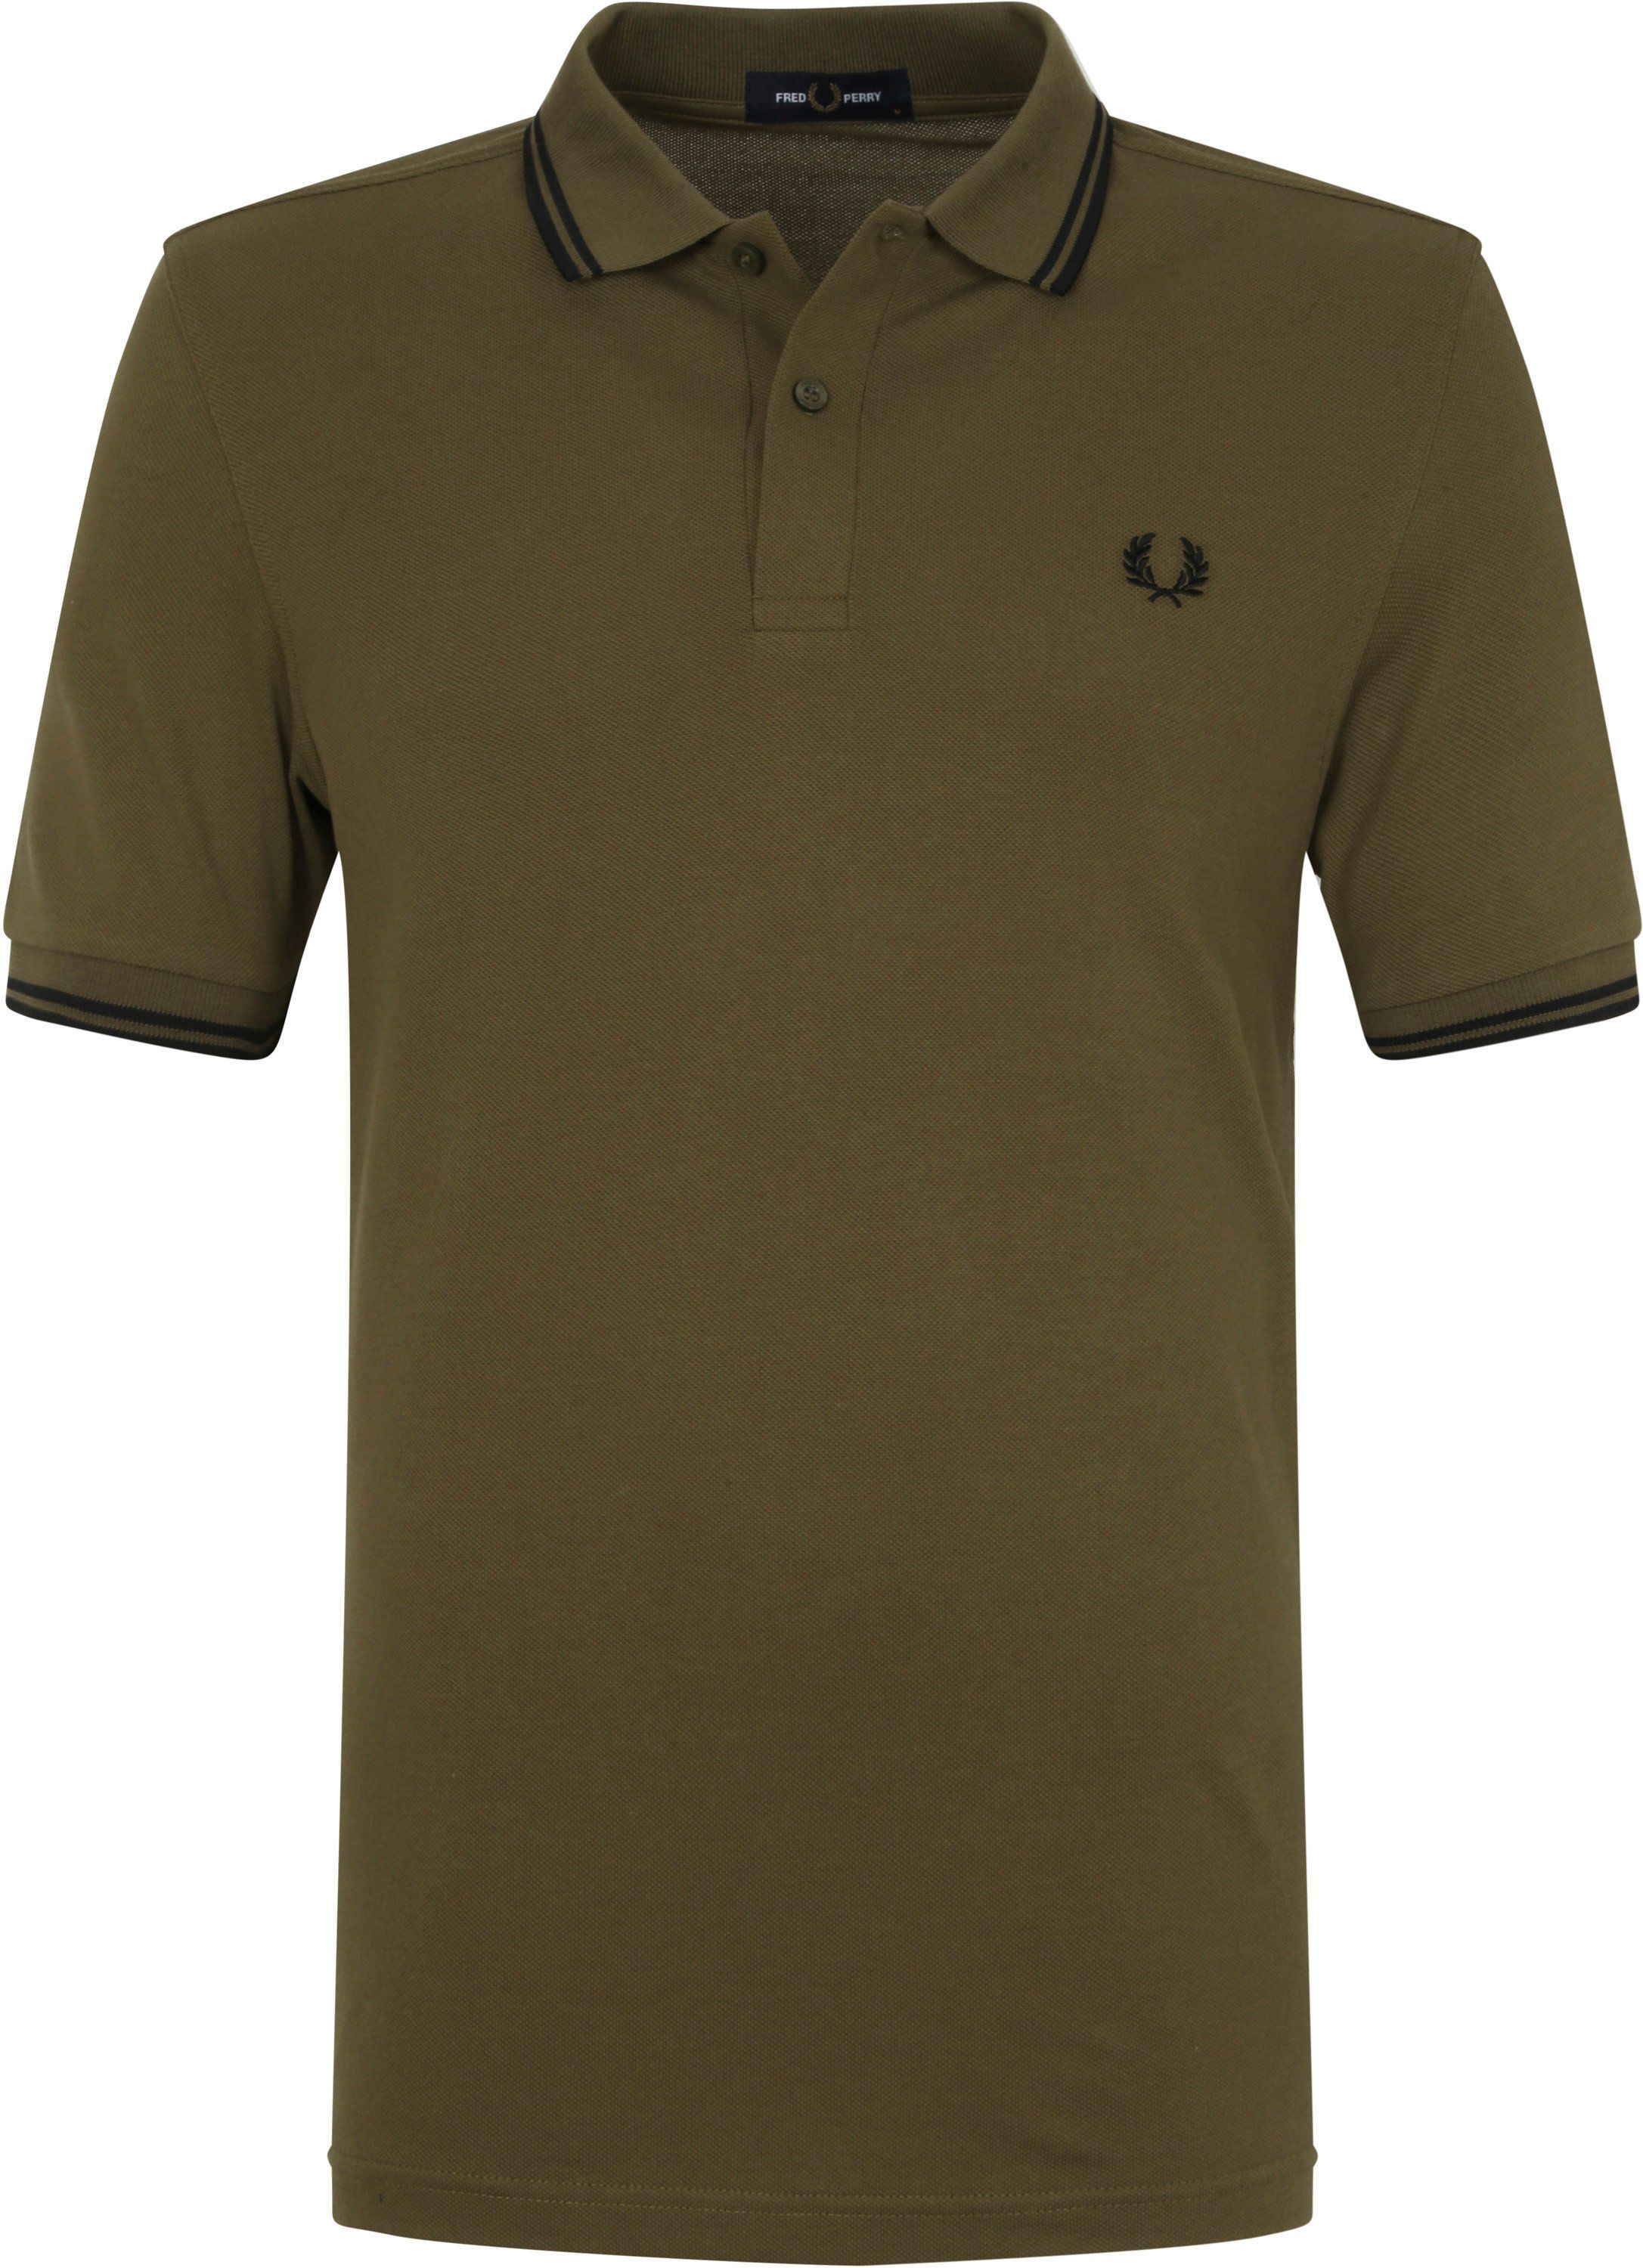 Fred Perry Polo M3600 Green Dark Green size L